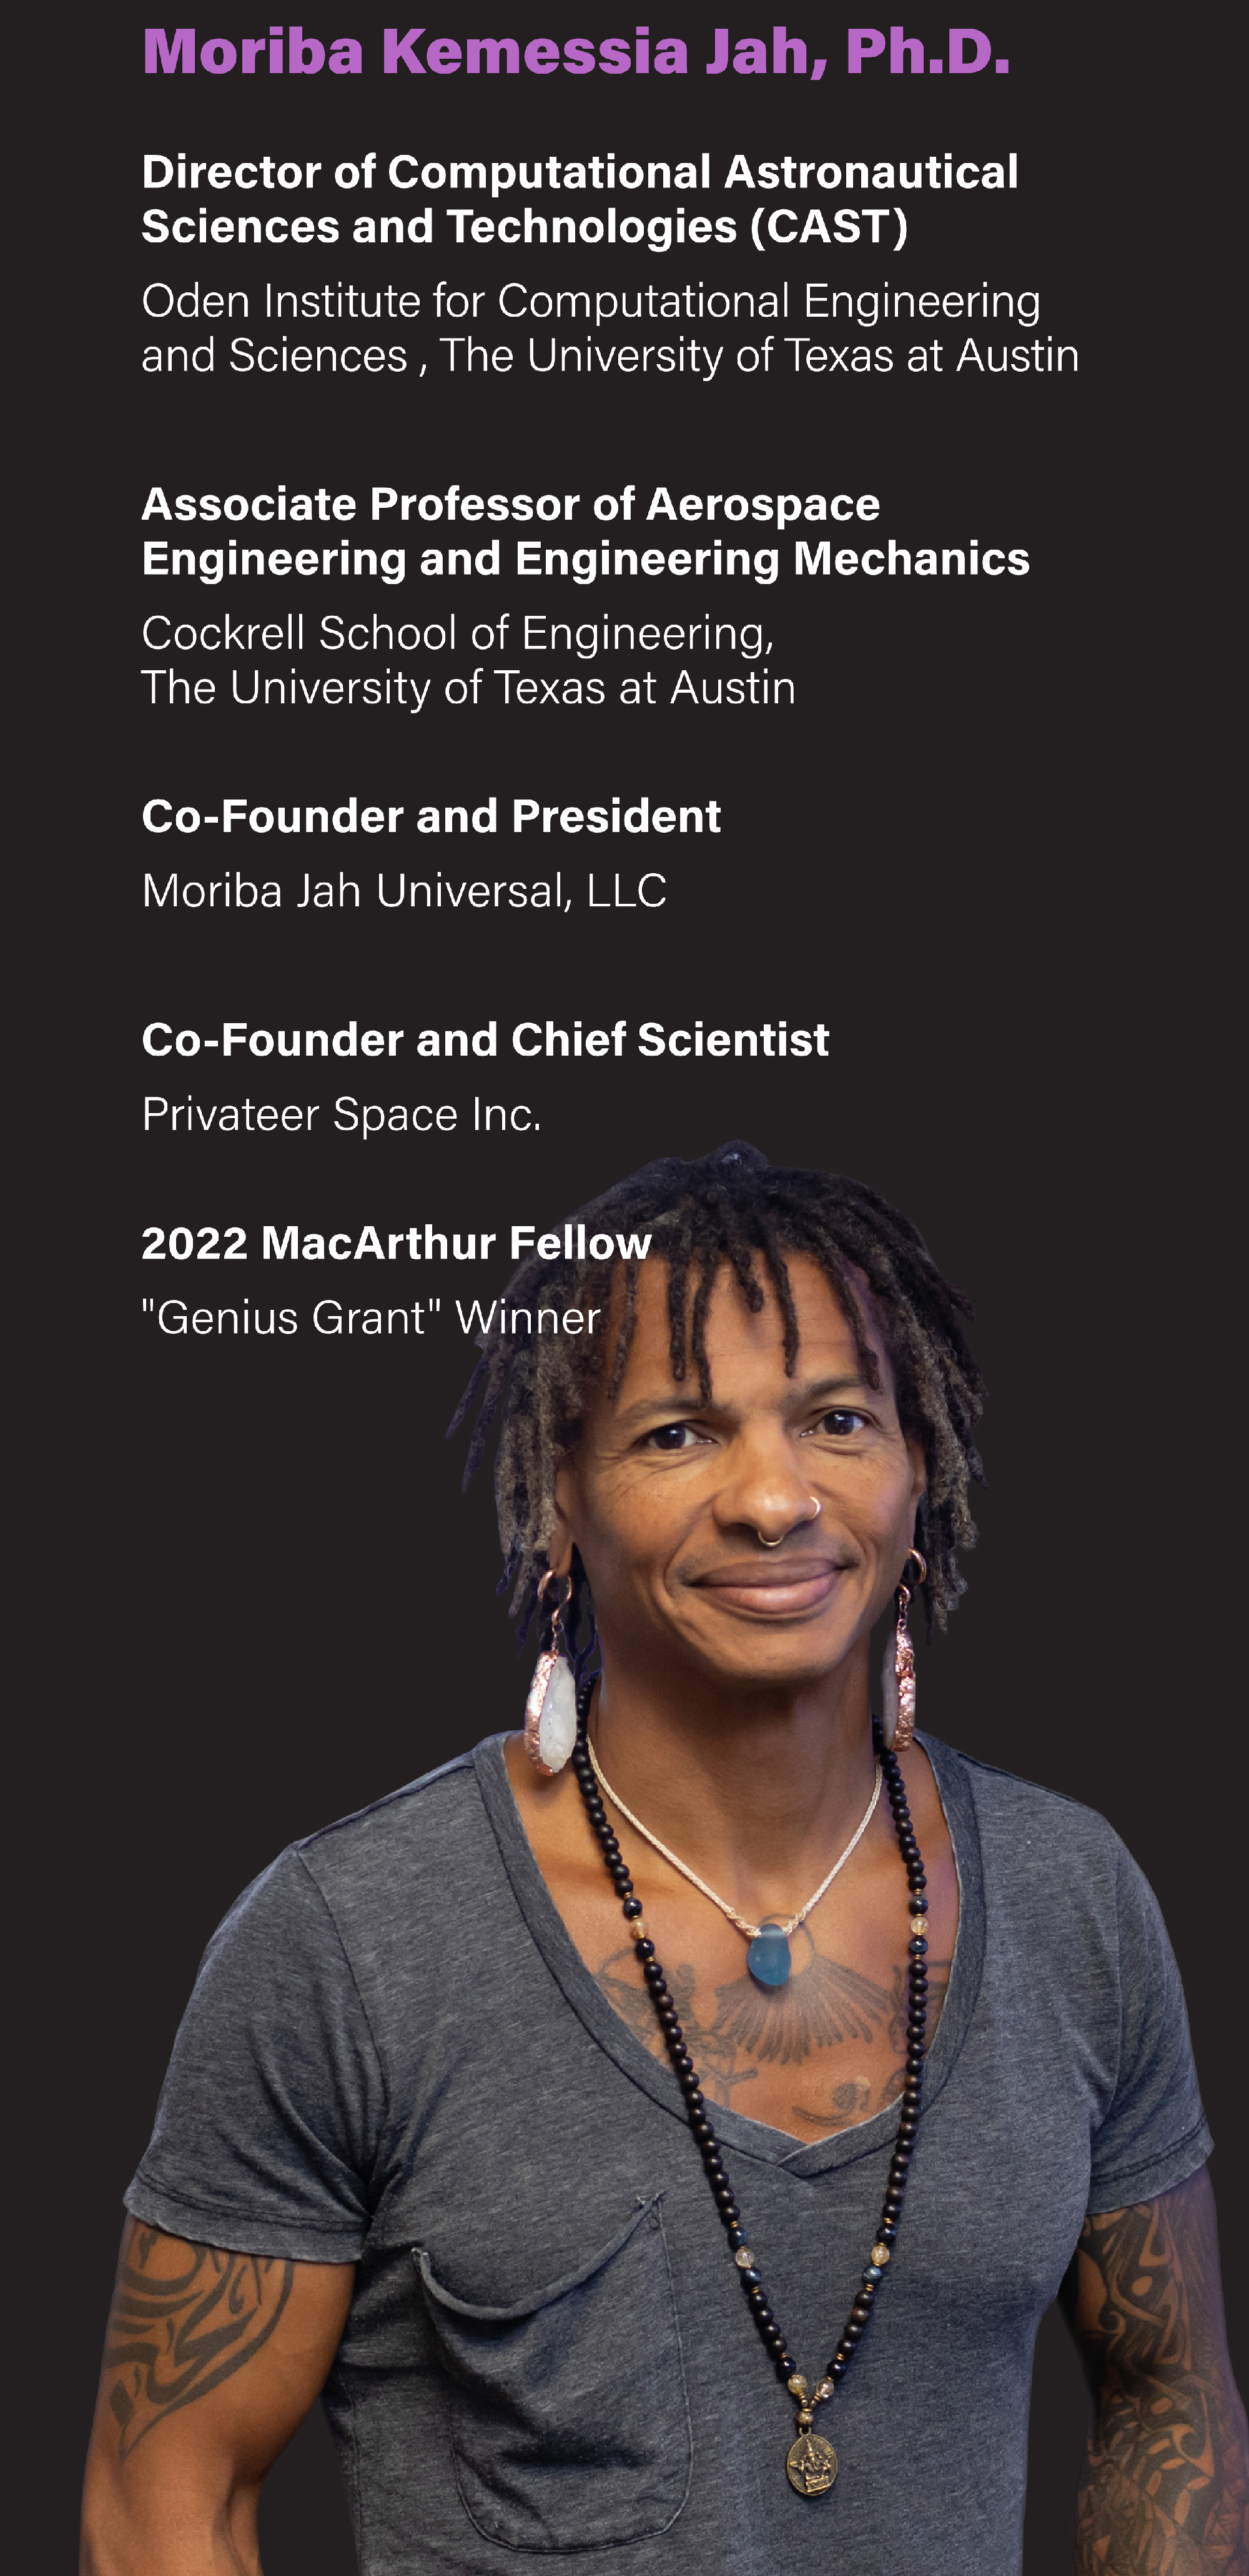 A photo of Moriba Kemessia Jah, Ph.D. and a list of 4 of his professional titles, including 2 from the University of Texas at Austin, Moriba Jah Universal, 2022 MacArthur Fellow, and Privateer Space.